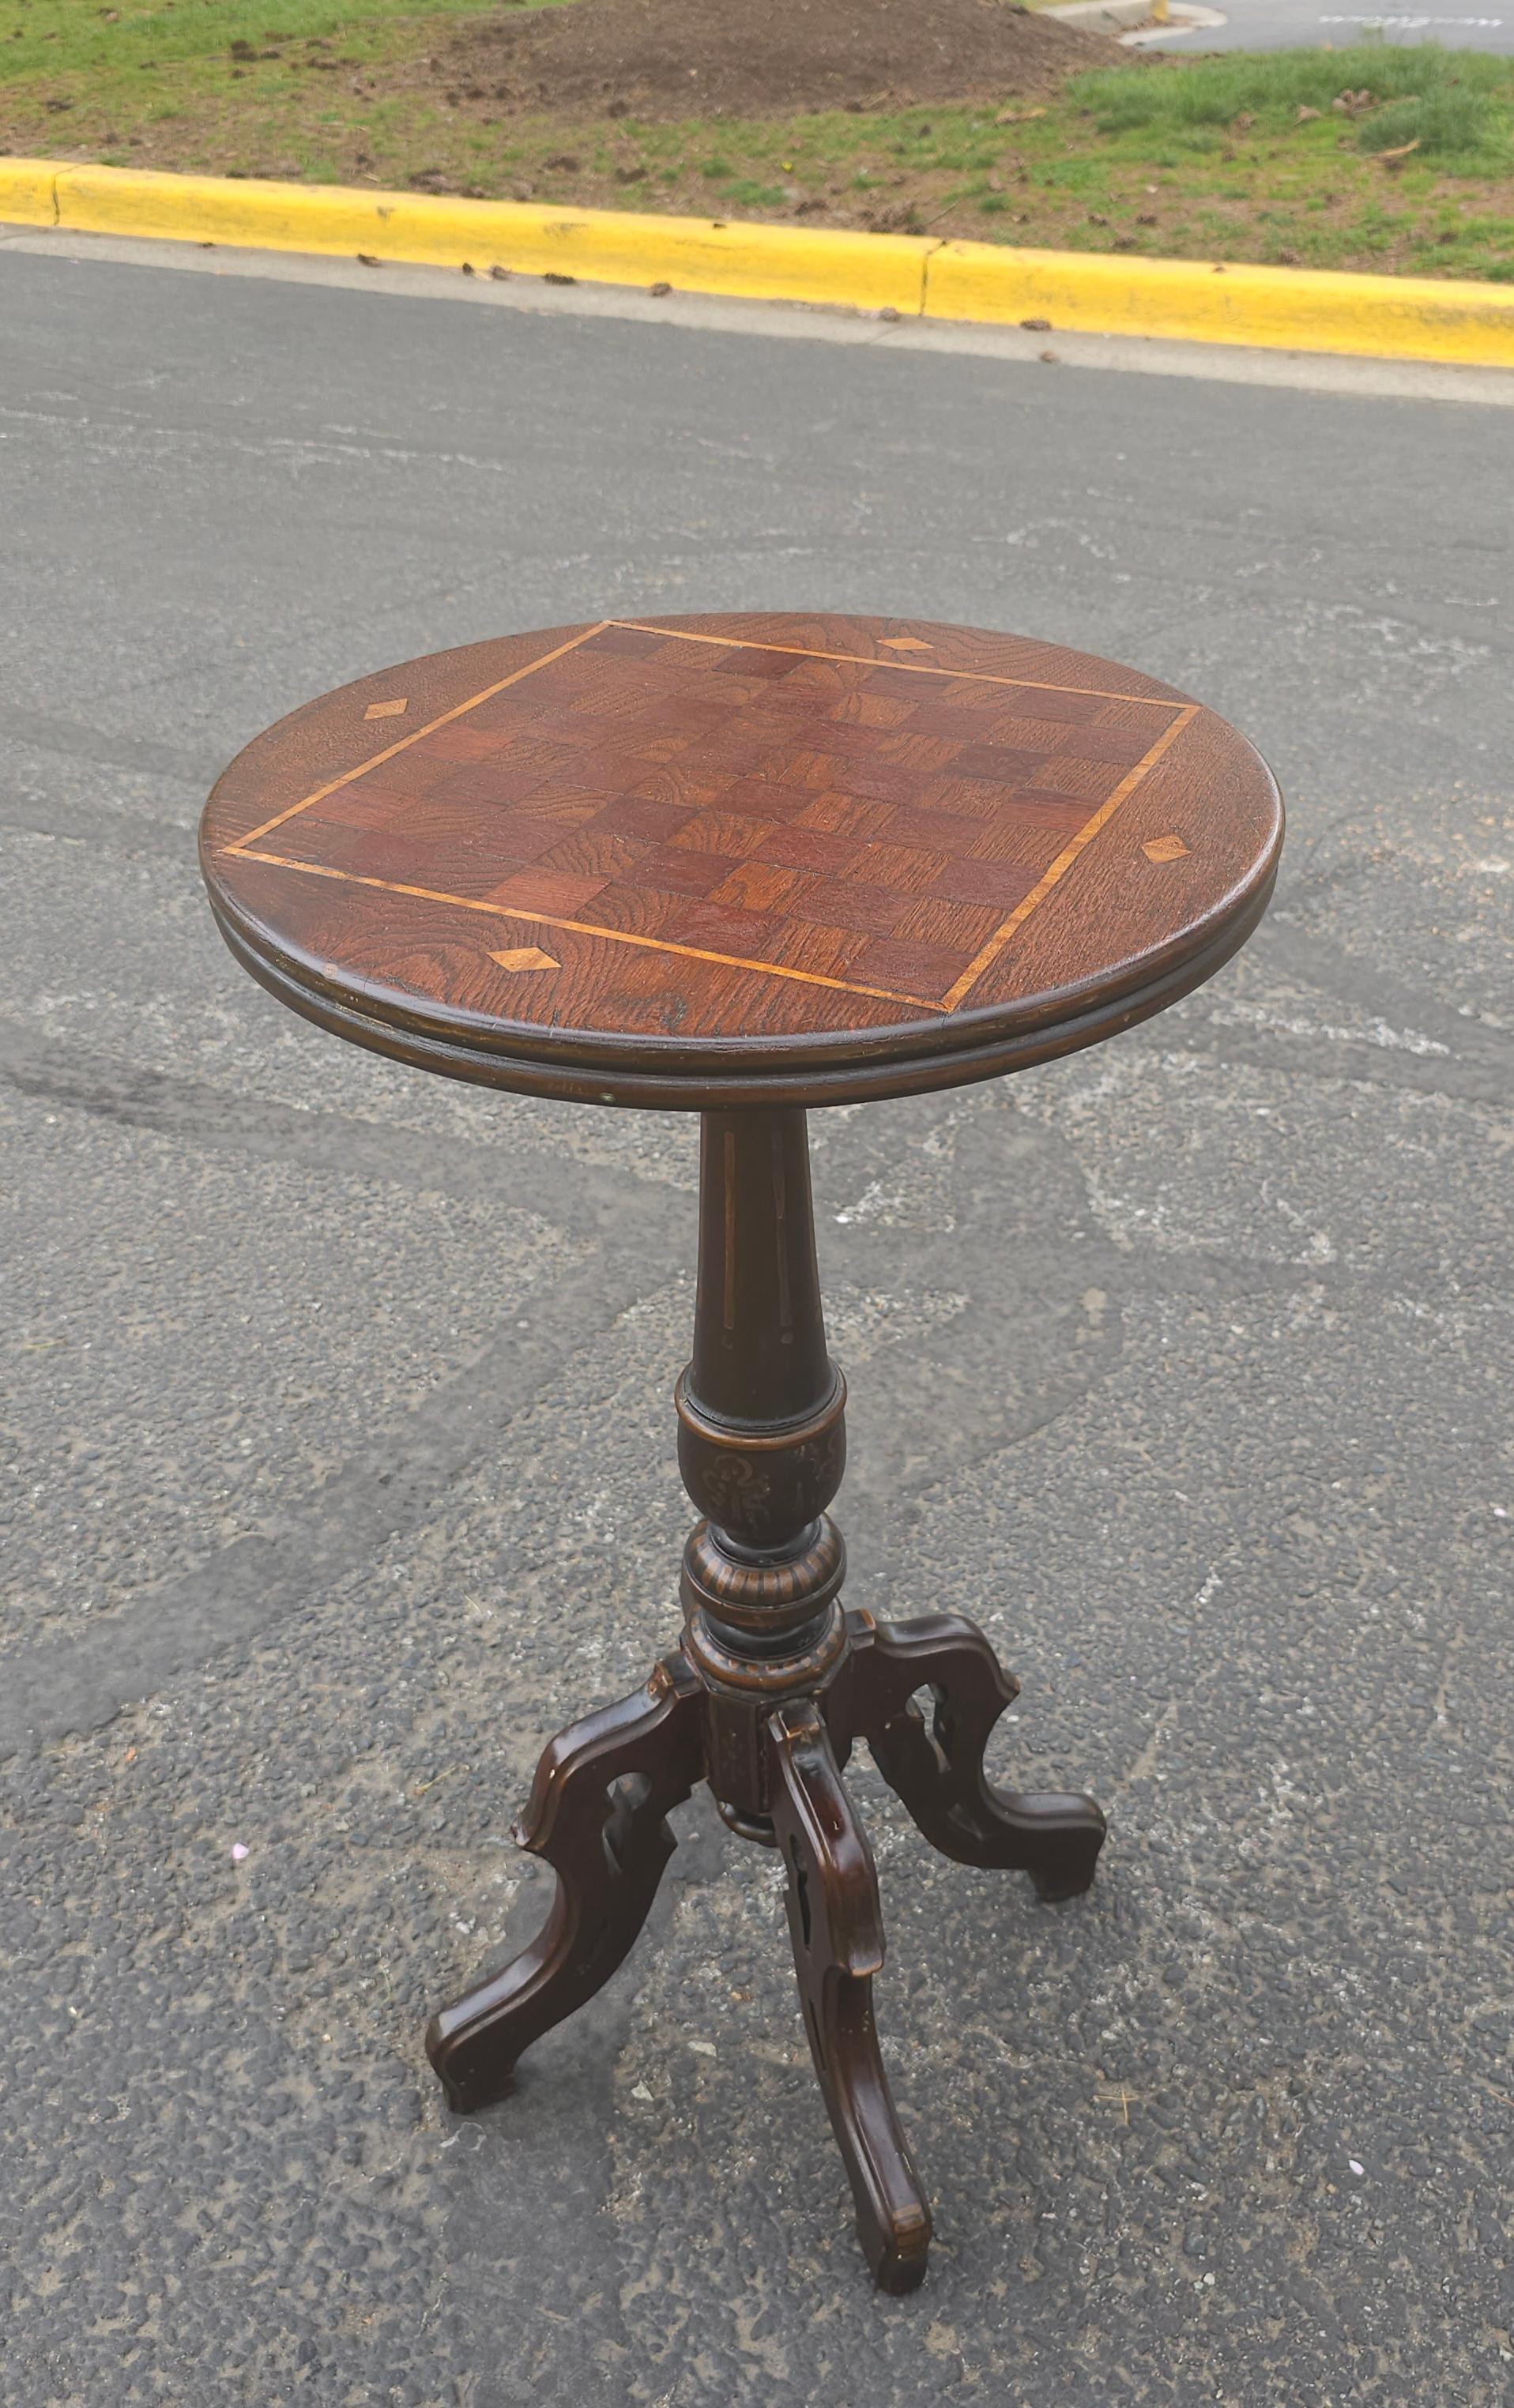 19th Century Victorian Oak & Mixed Wood Parquetry and Inlay Pedestal Game Table For Sale 7